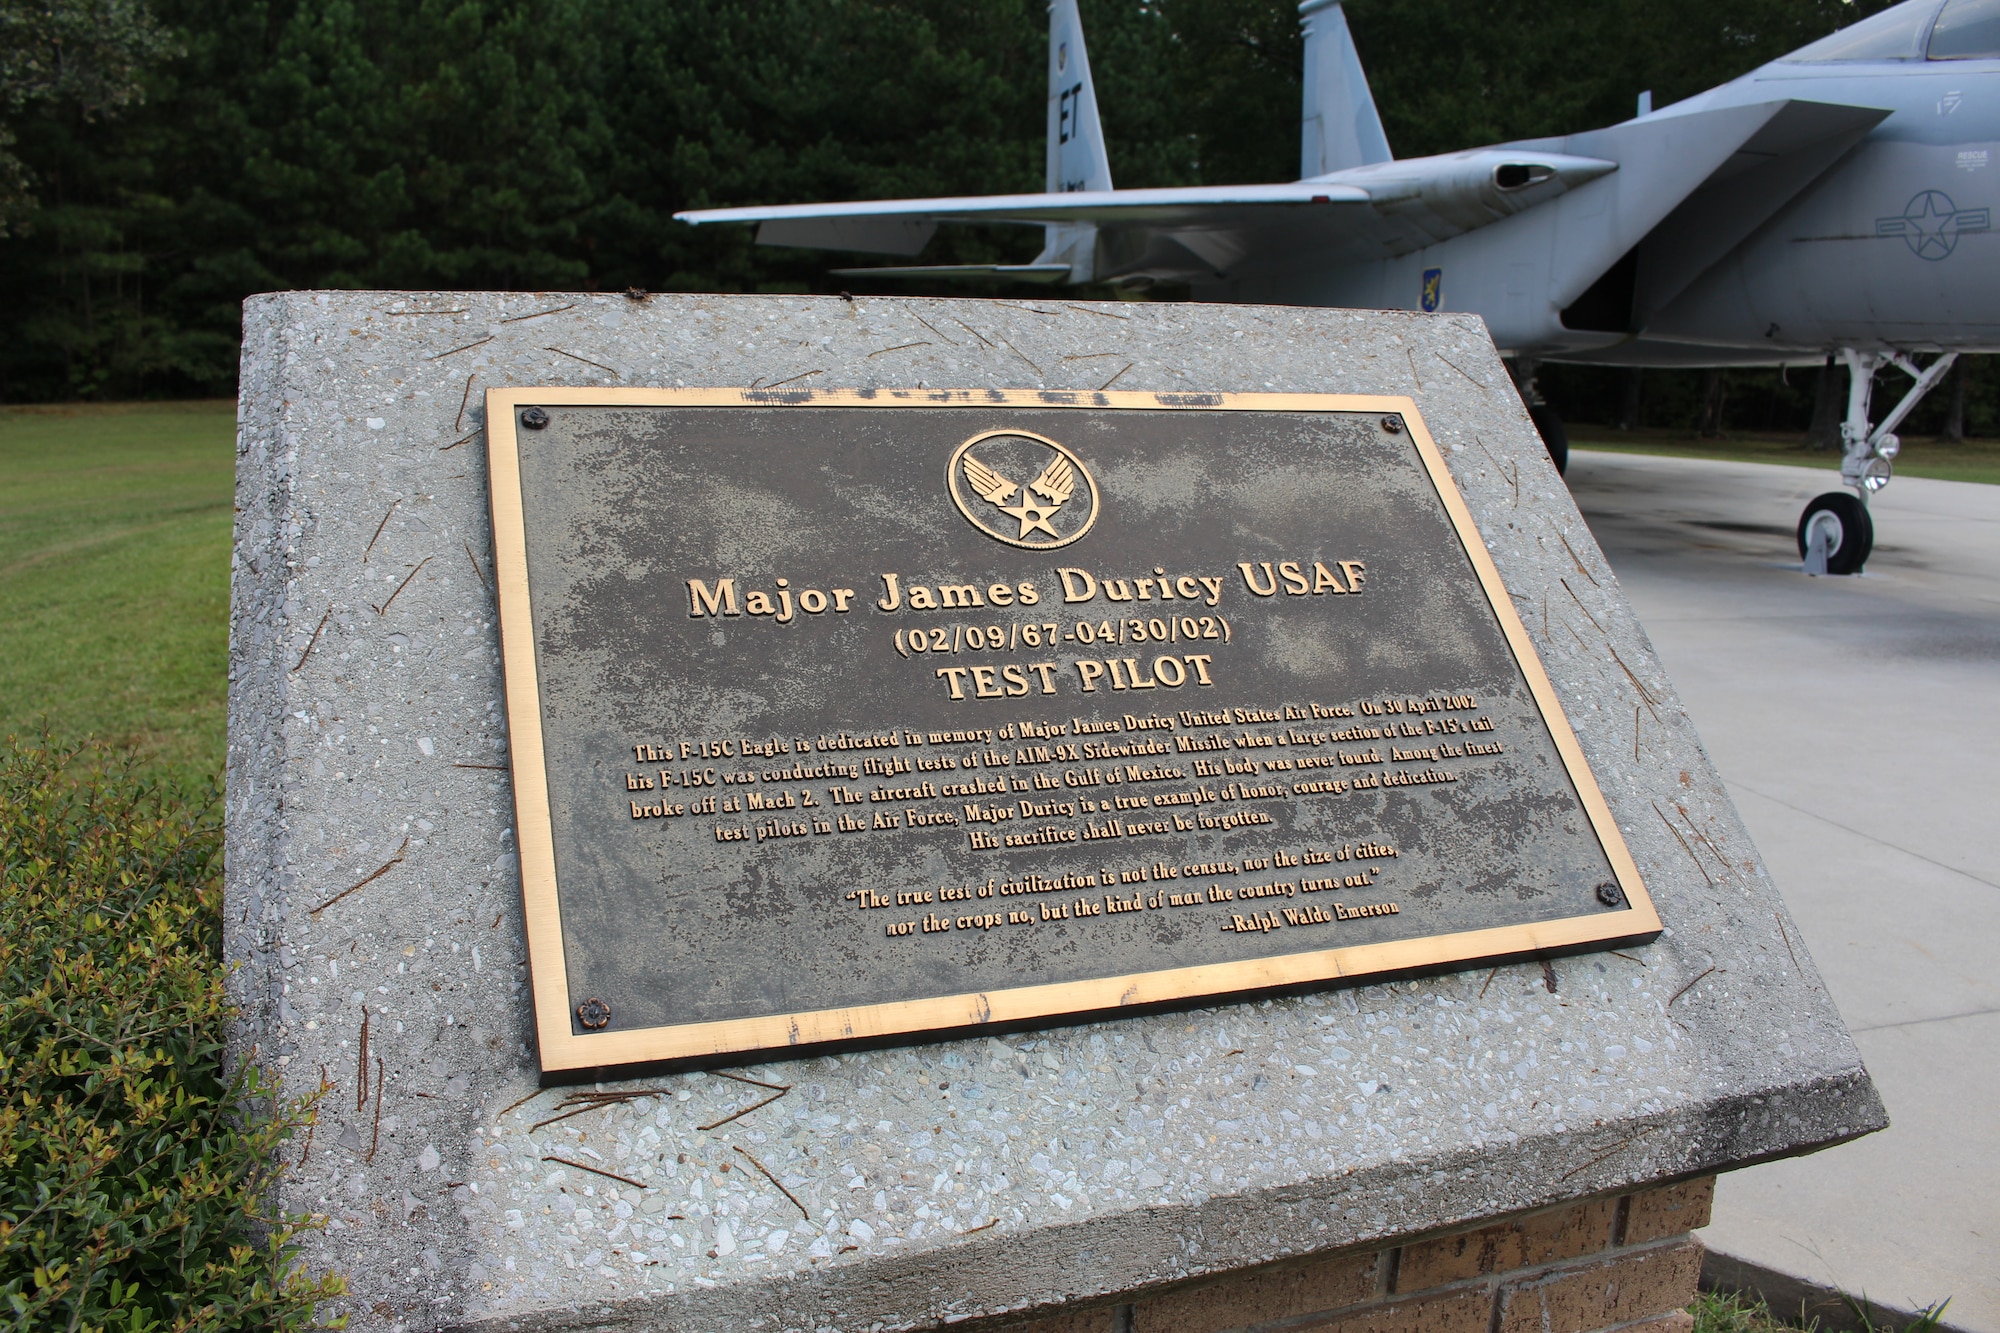 This plaque is located next to the static F-15 Eagle on display outside the Main Gate at Arnold Air Force Base, Tenn. The display is dedicated to Maj. Jim Duricy. He died April 30, 2002, when he was forced to eject at a high speed as the F-15C he piloted crashed into the Gulf of Mexico. His body was never found. A 12-year test pilot, Duricy was assigned to the 40th Flight Test Squadron based at Eglin Air Force Base, Fla., at the time of his death. He was on a captive flight development test of a new missile when the aircraft crashed. (U.S. Air Force photo by Kali Bradford)